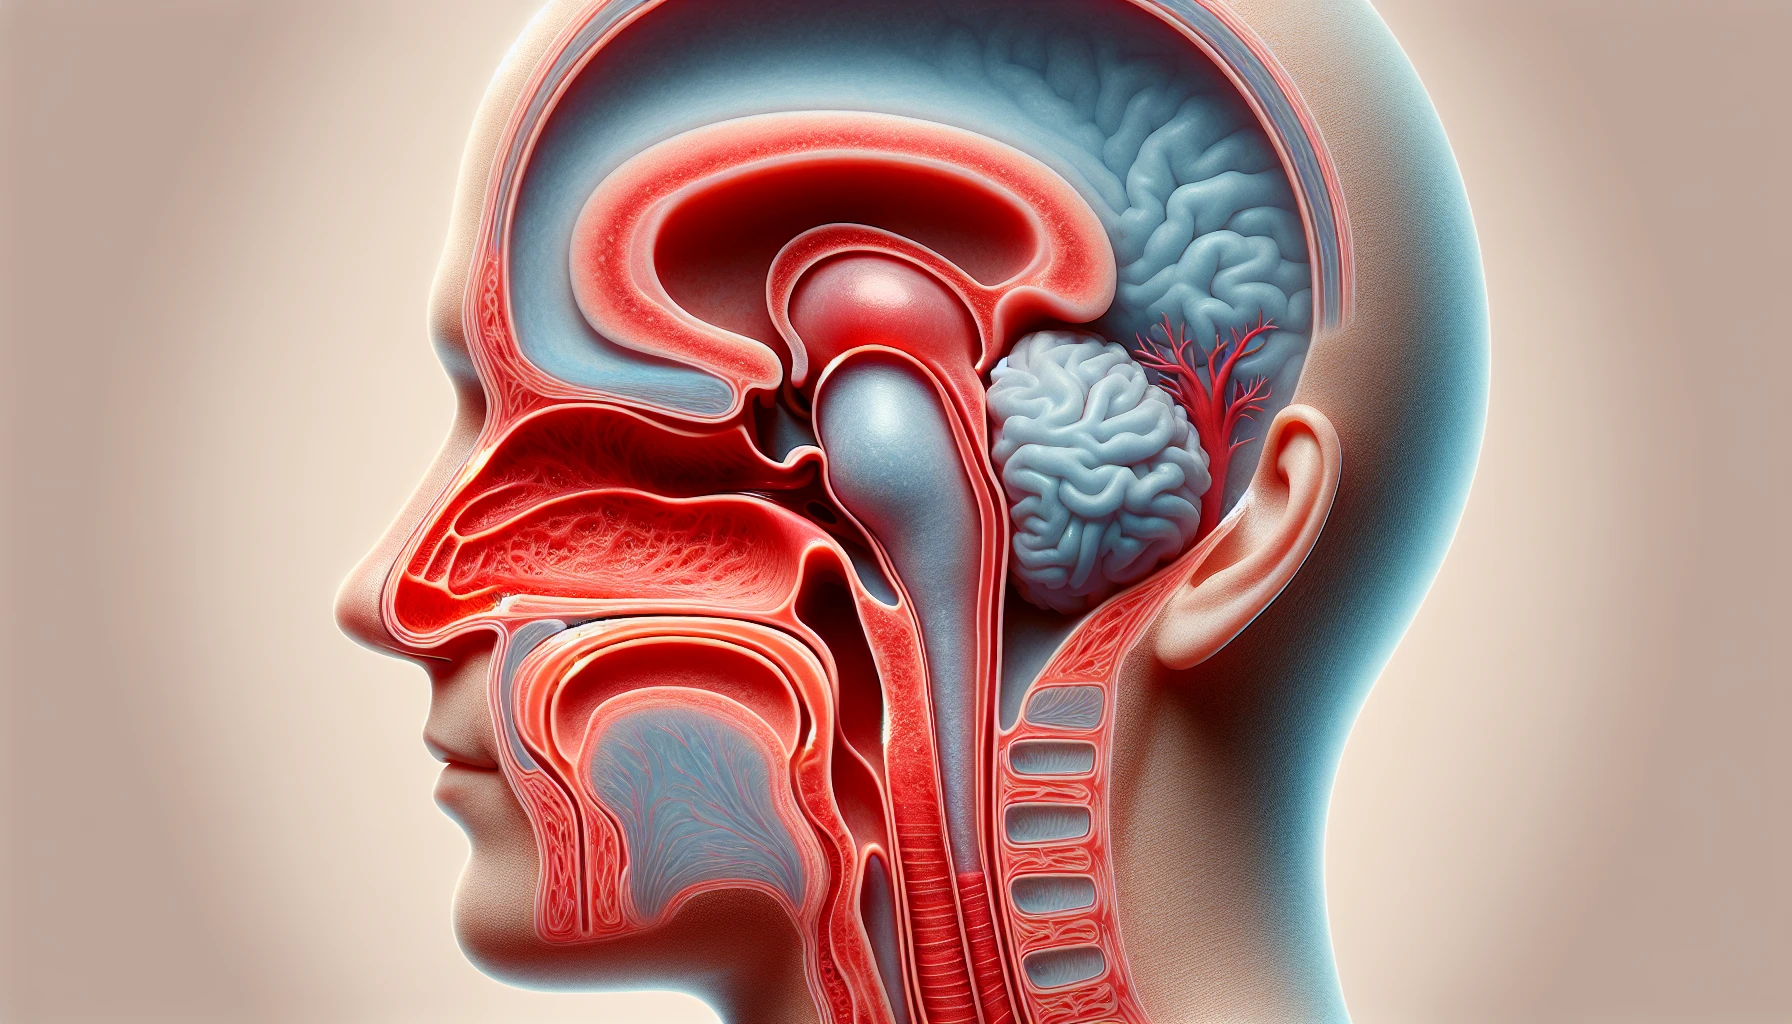 Illustration of sinus congestion and nasal passages